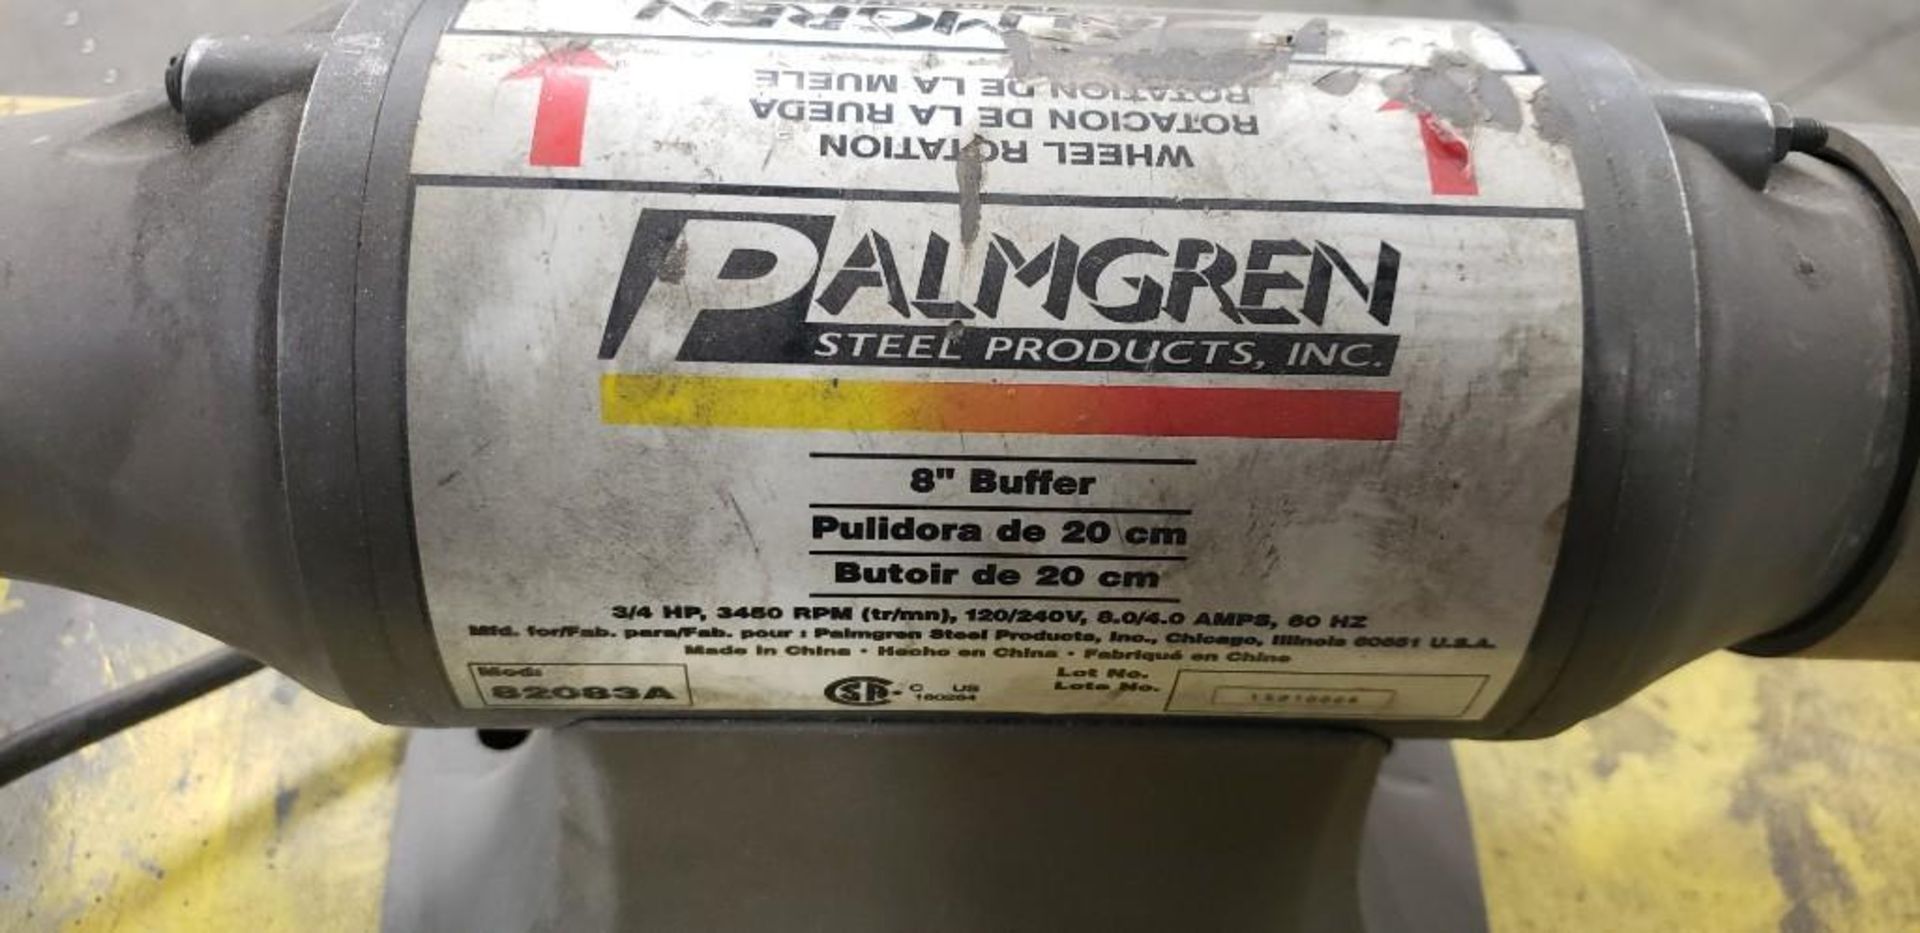 PALMGREN 8" BUFFER MODEL 82083A WITH STEEL STAND - Image 3 of 3